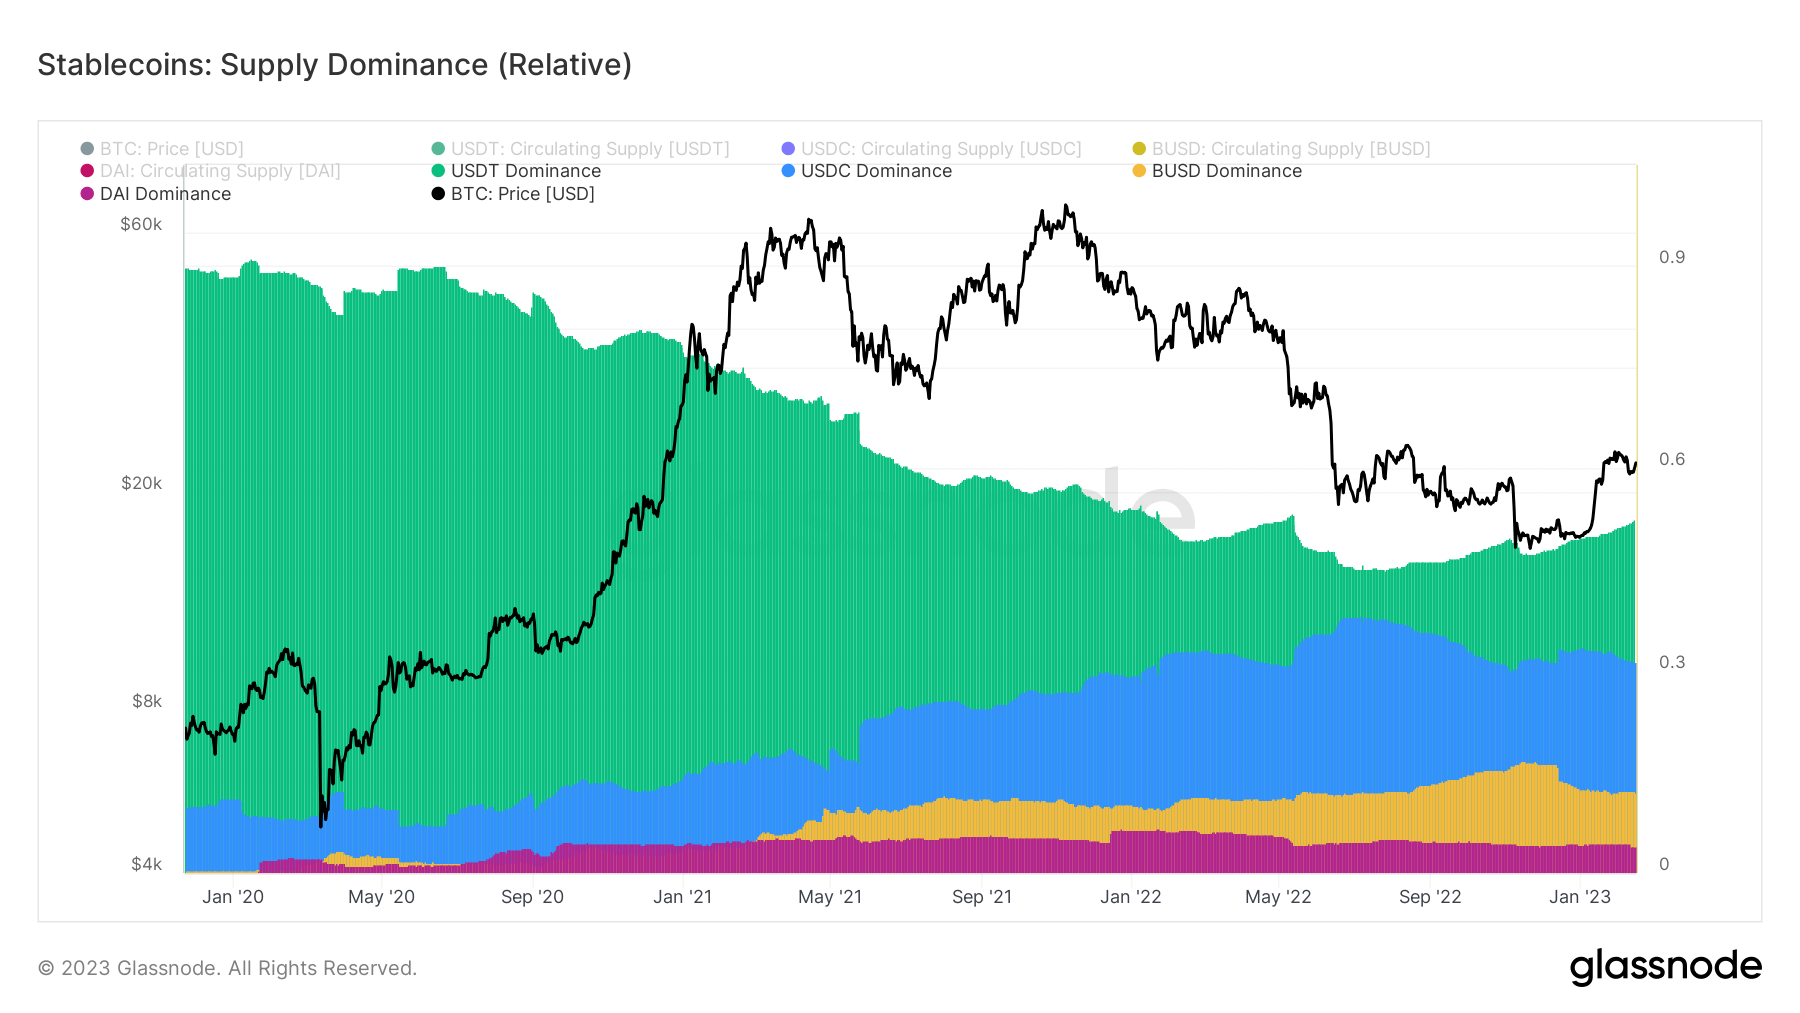 Change in stablecoin power map While BUSD dominance is declining, USDT is over 50% again 2